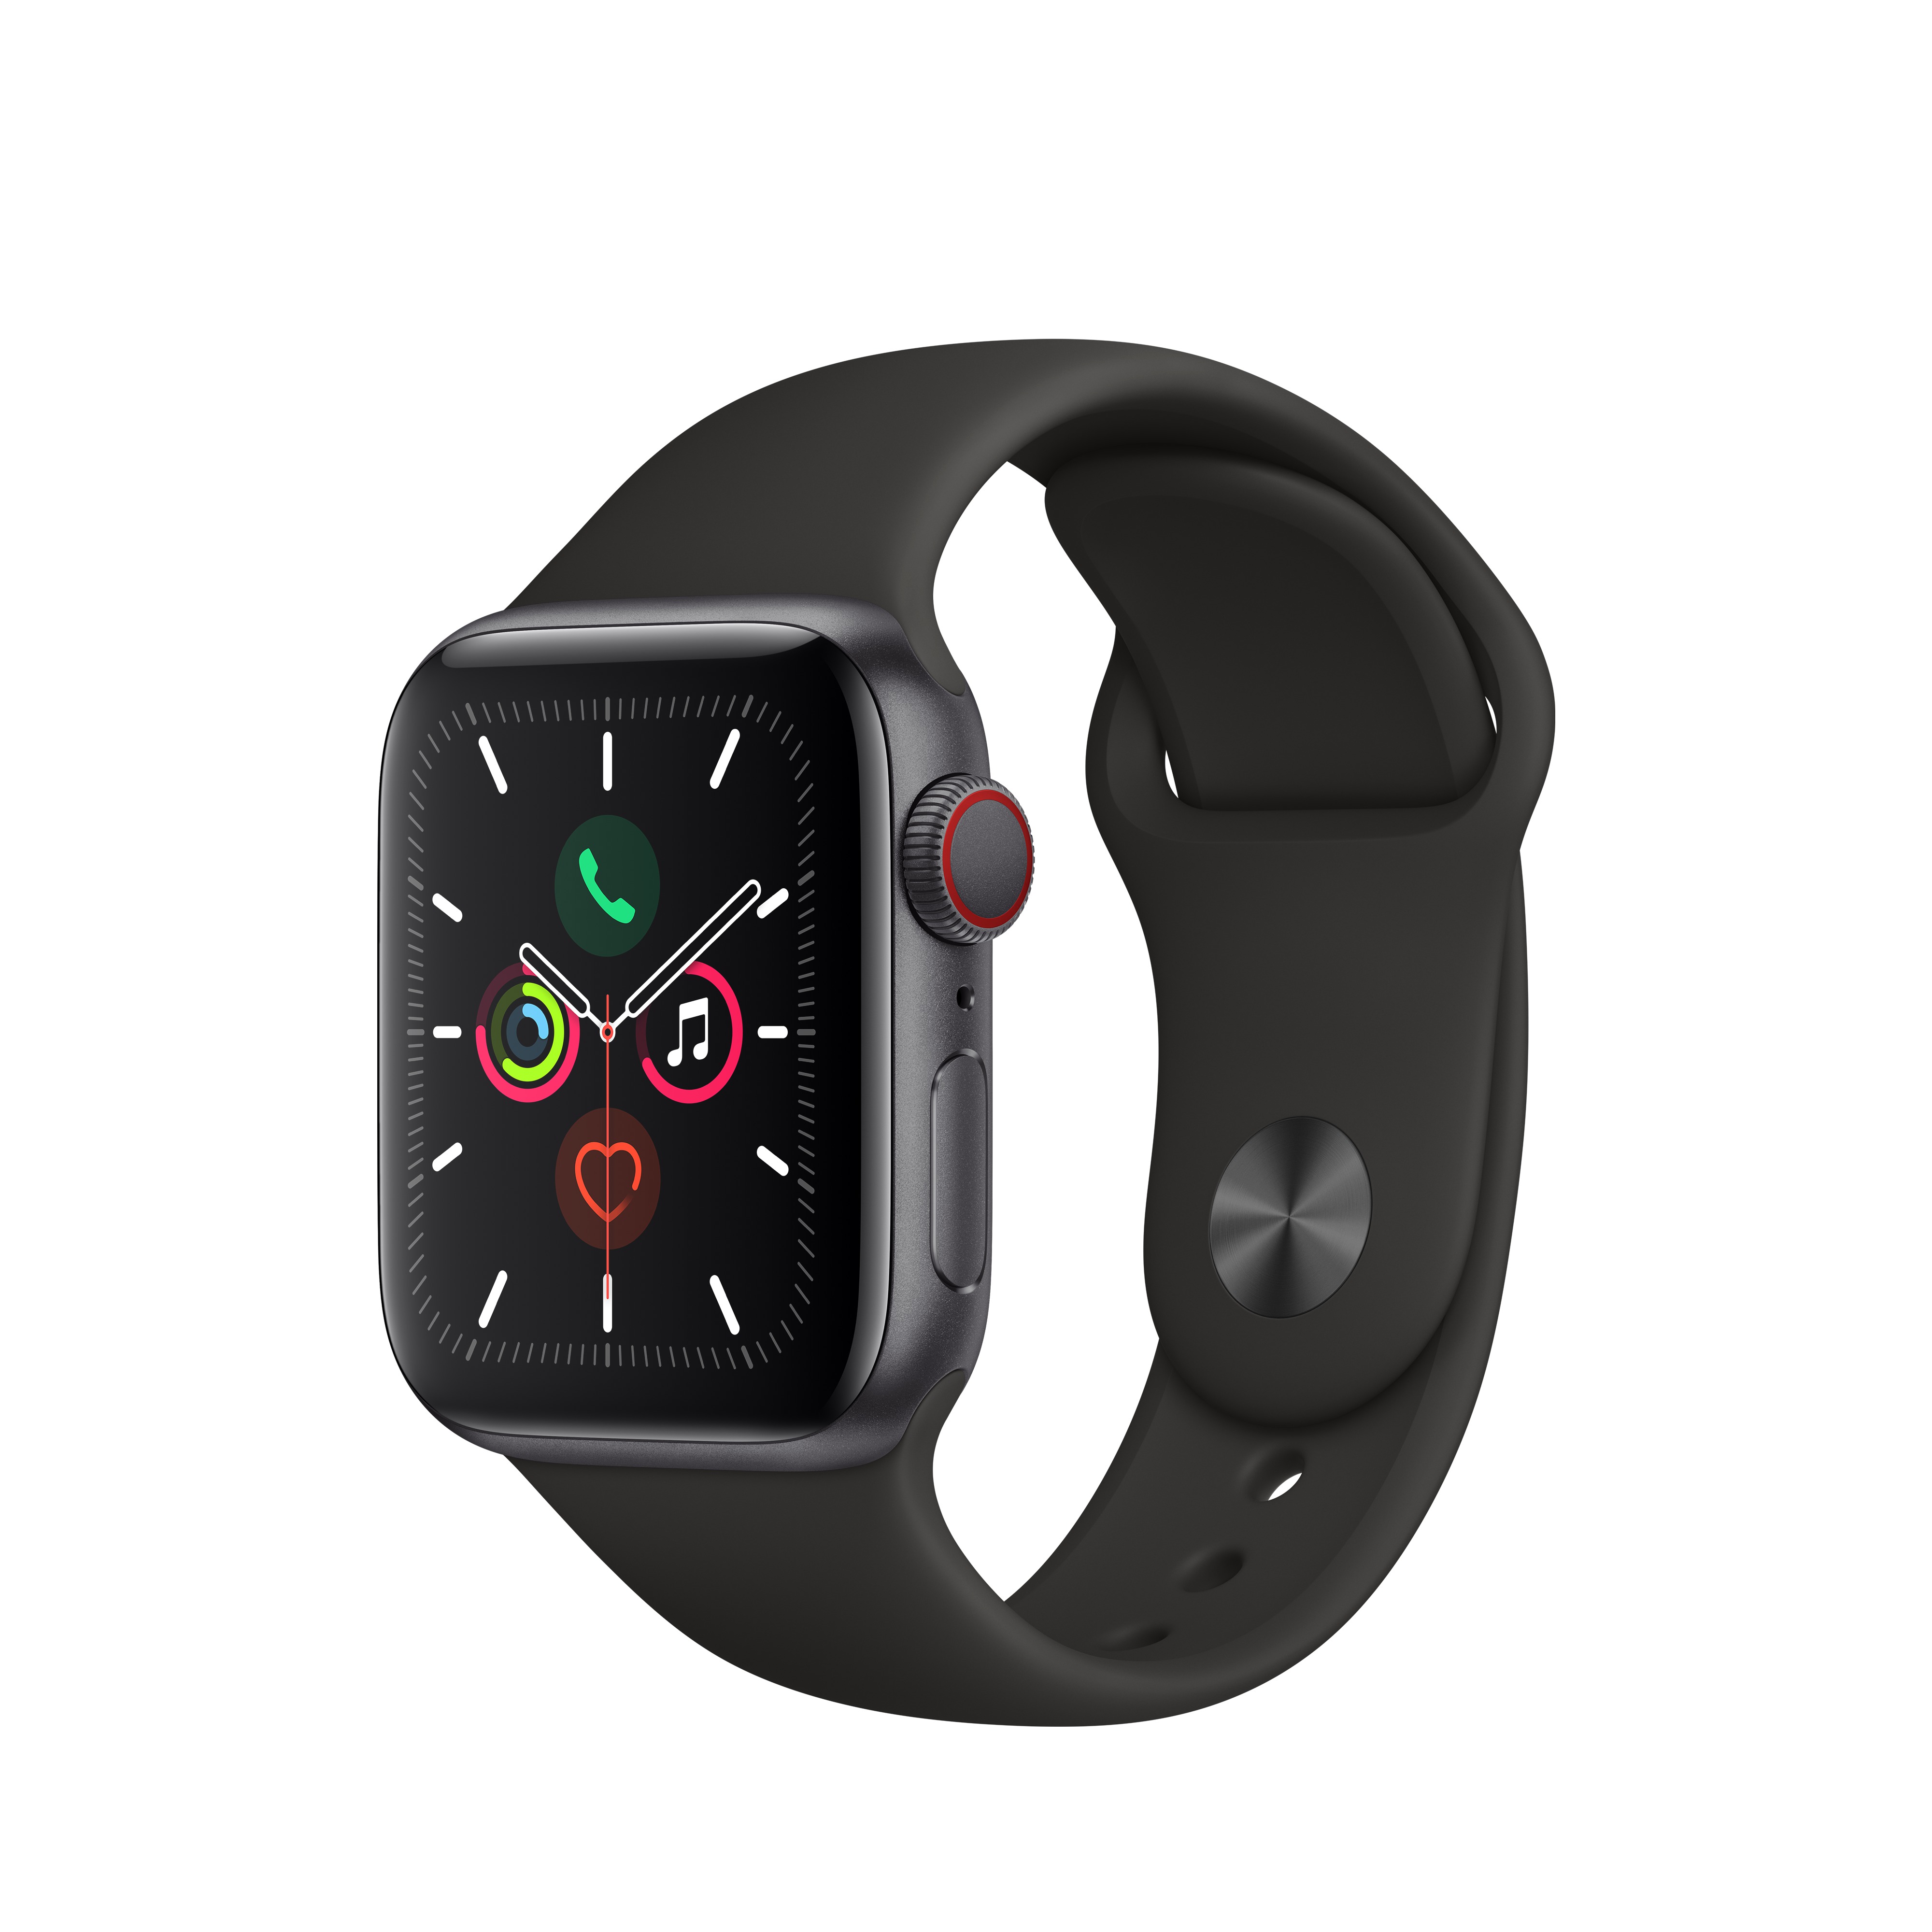 Apple Watch Series 5 GPS + Cellular, 40mm Space Gray Aluminum Case with Black Sport Band - S/M & M/L - image 1 of 6